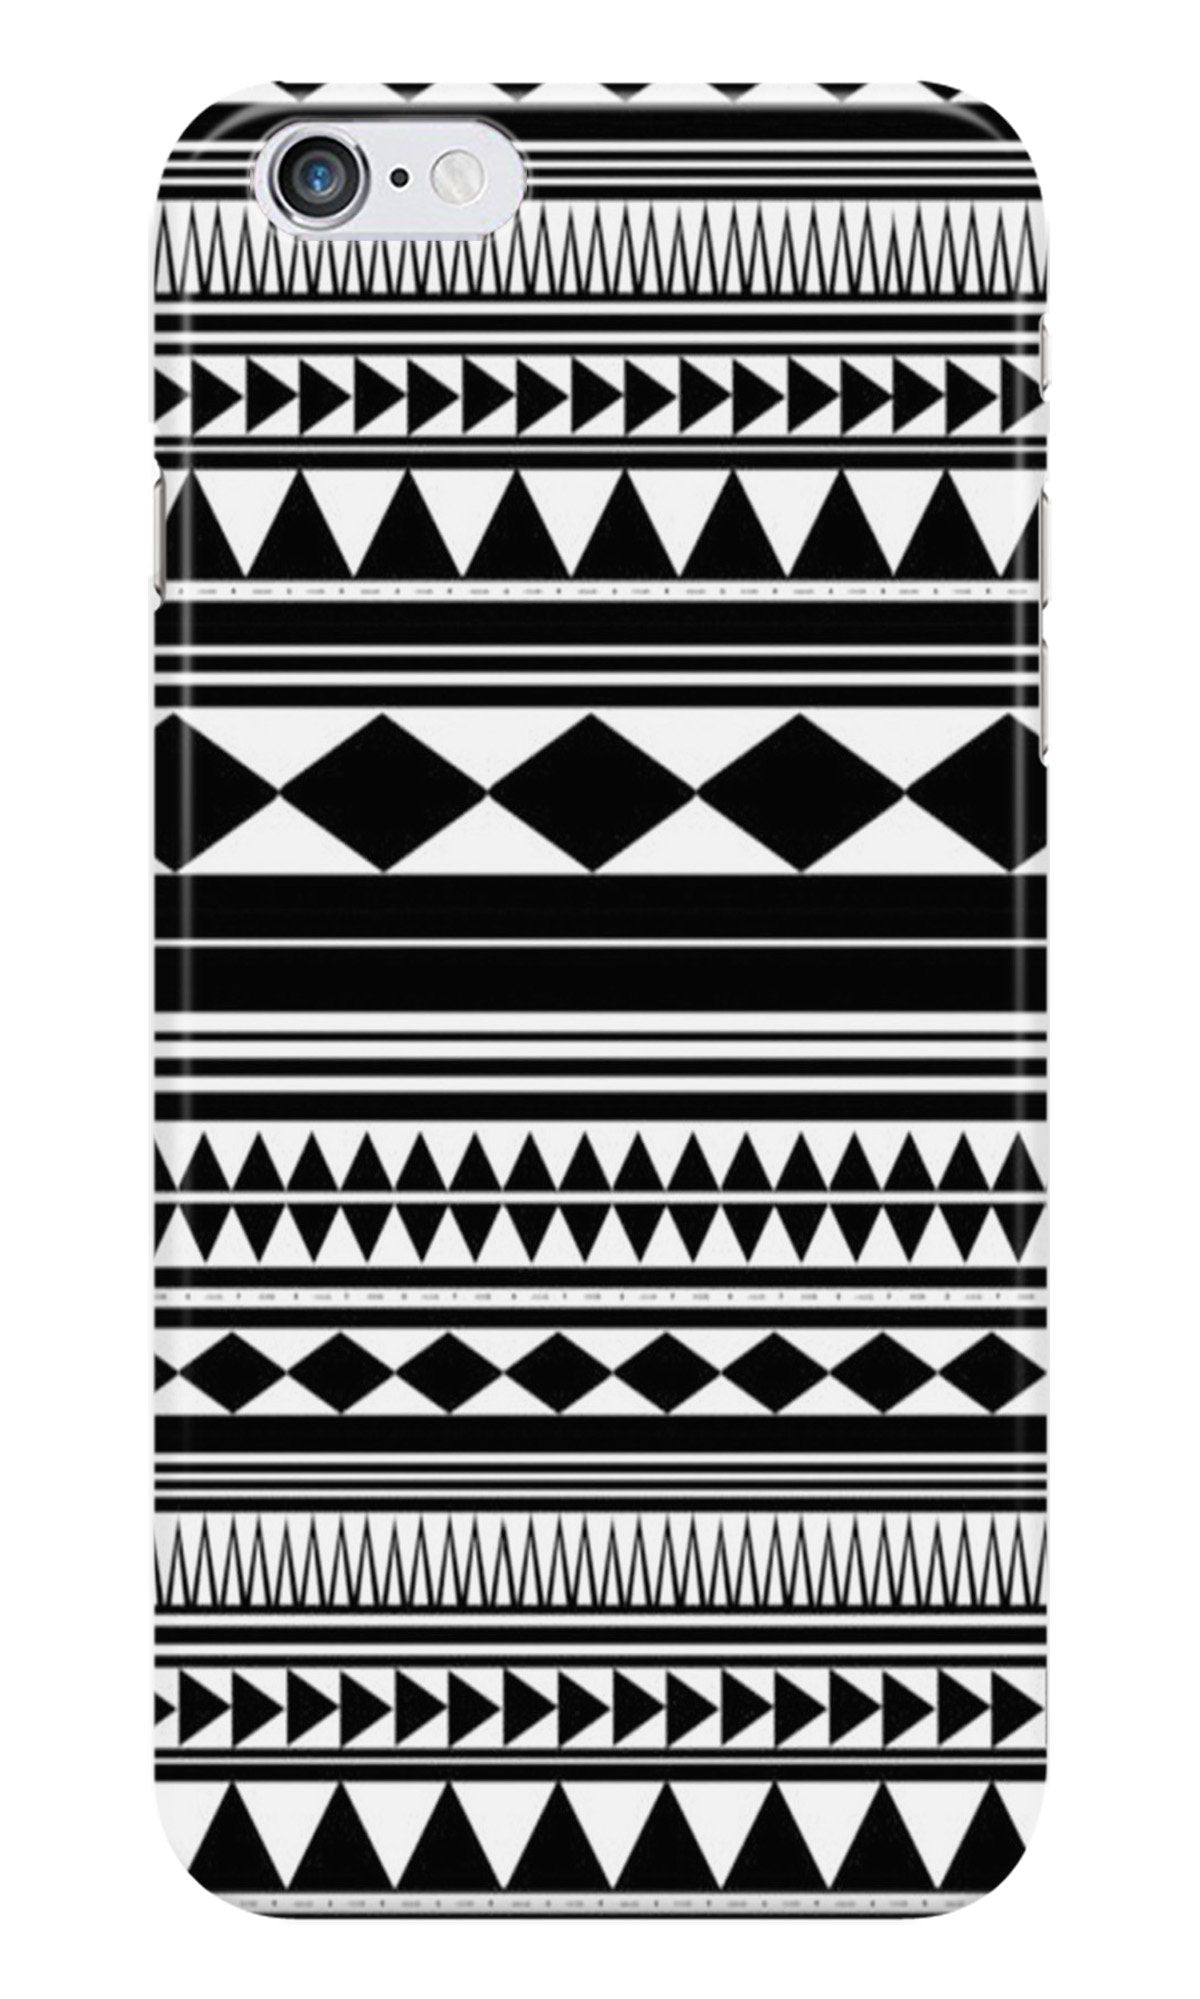 Black white Pattern Case for iPhone 6/ 6s